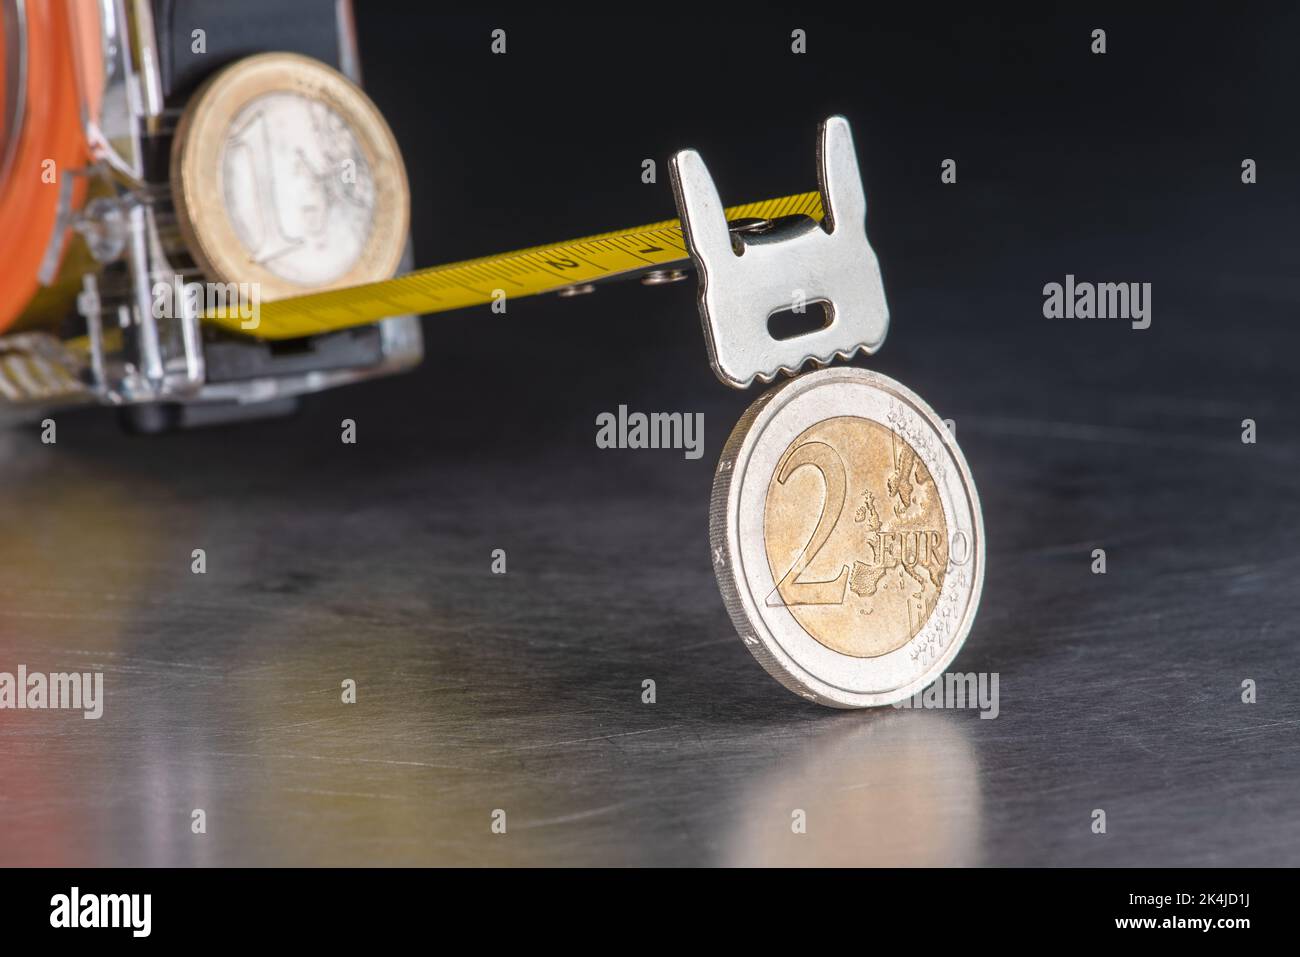 Inflation concept, coins and measure tape as rising prices Stock Photo